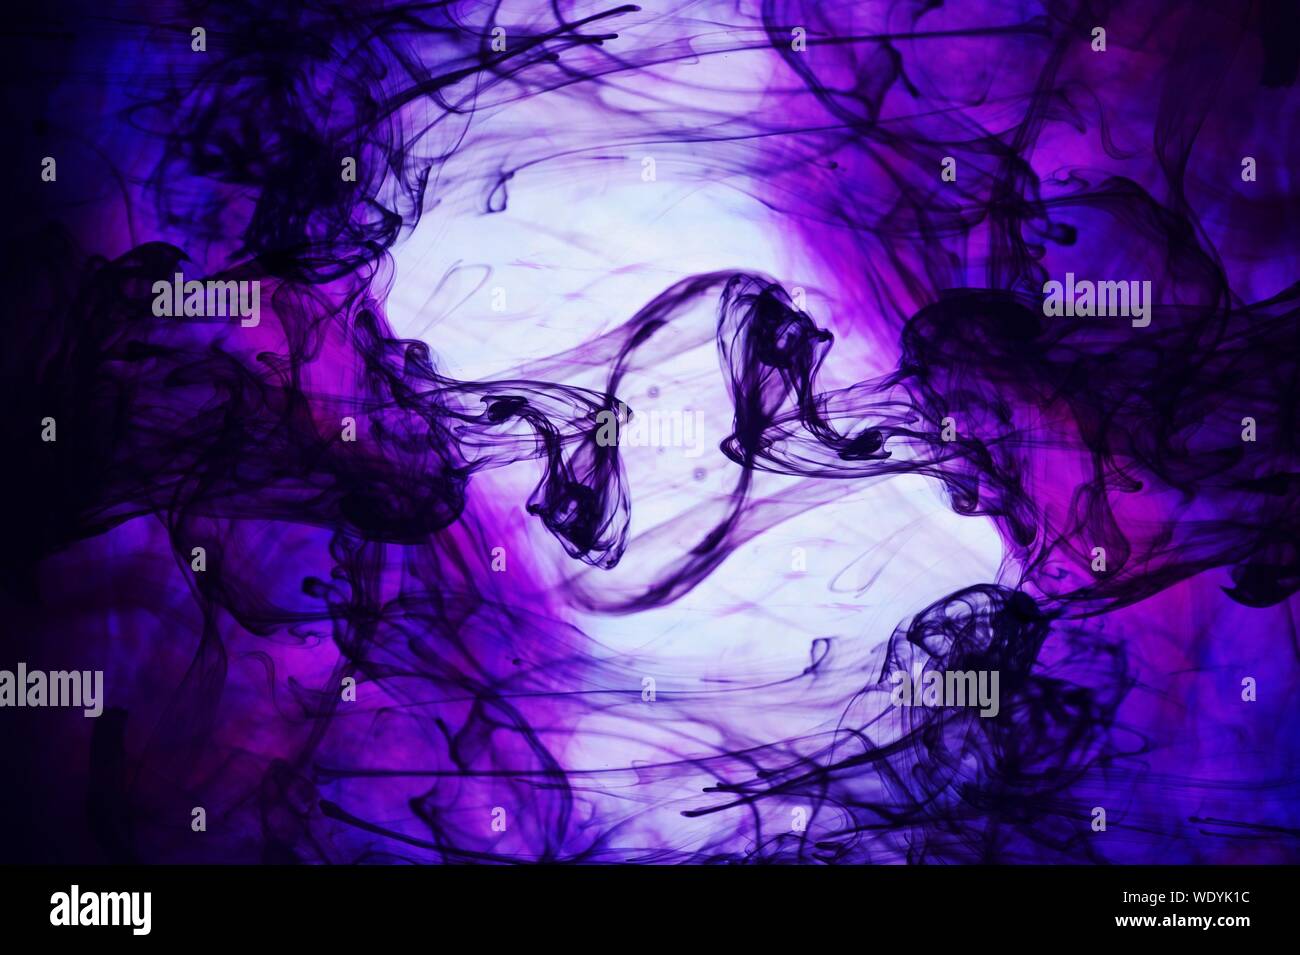 Abstract Image Of Purple Dissolving Water Stock Photo